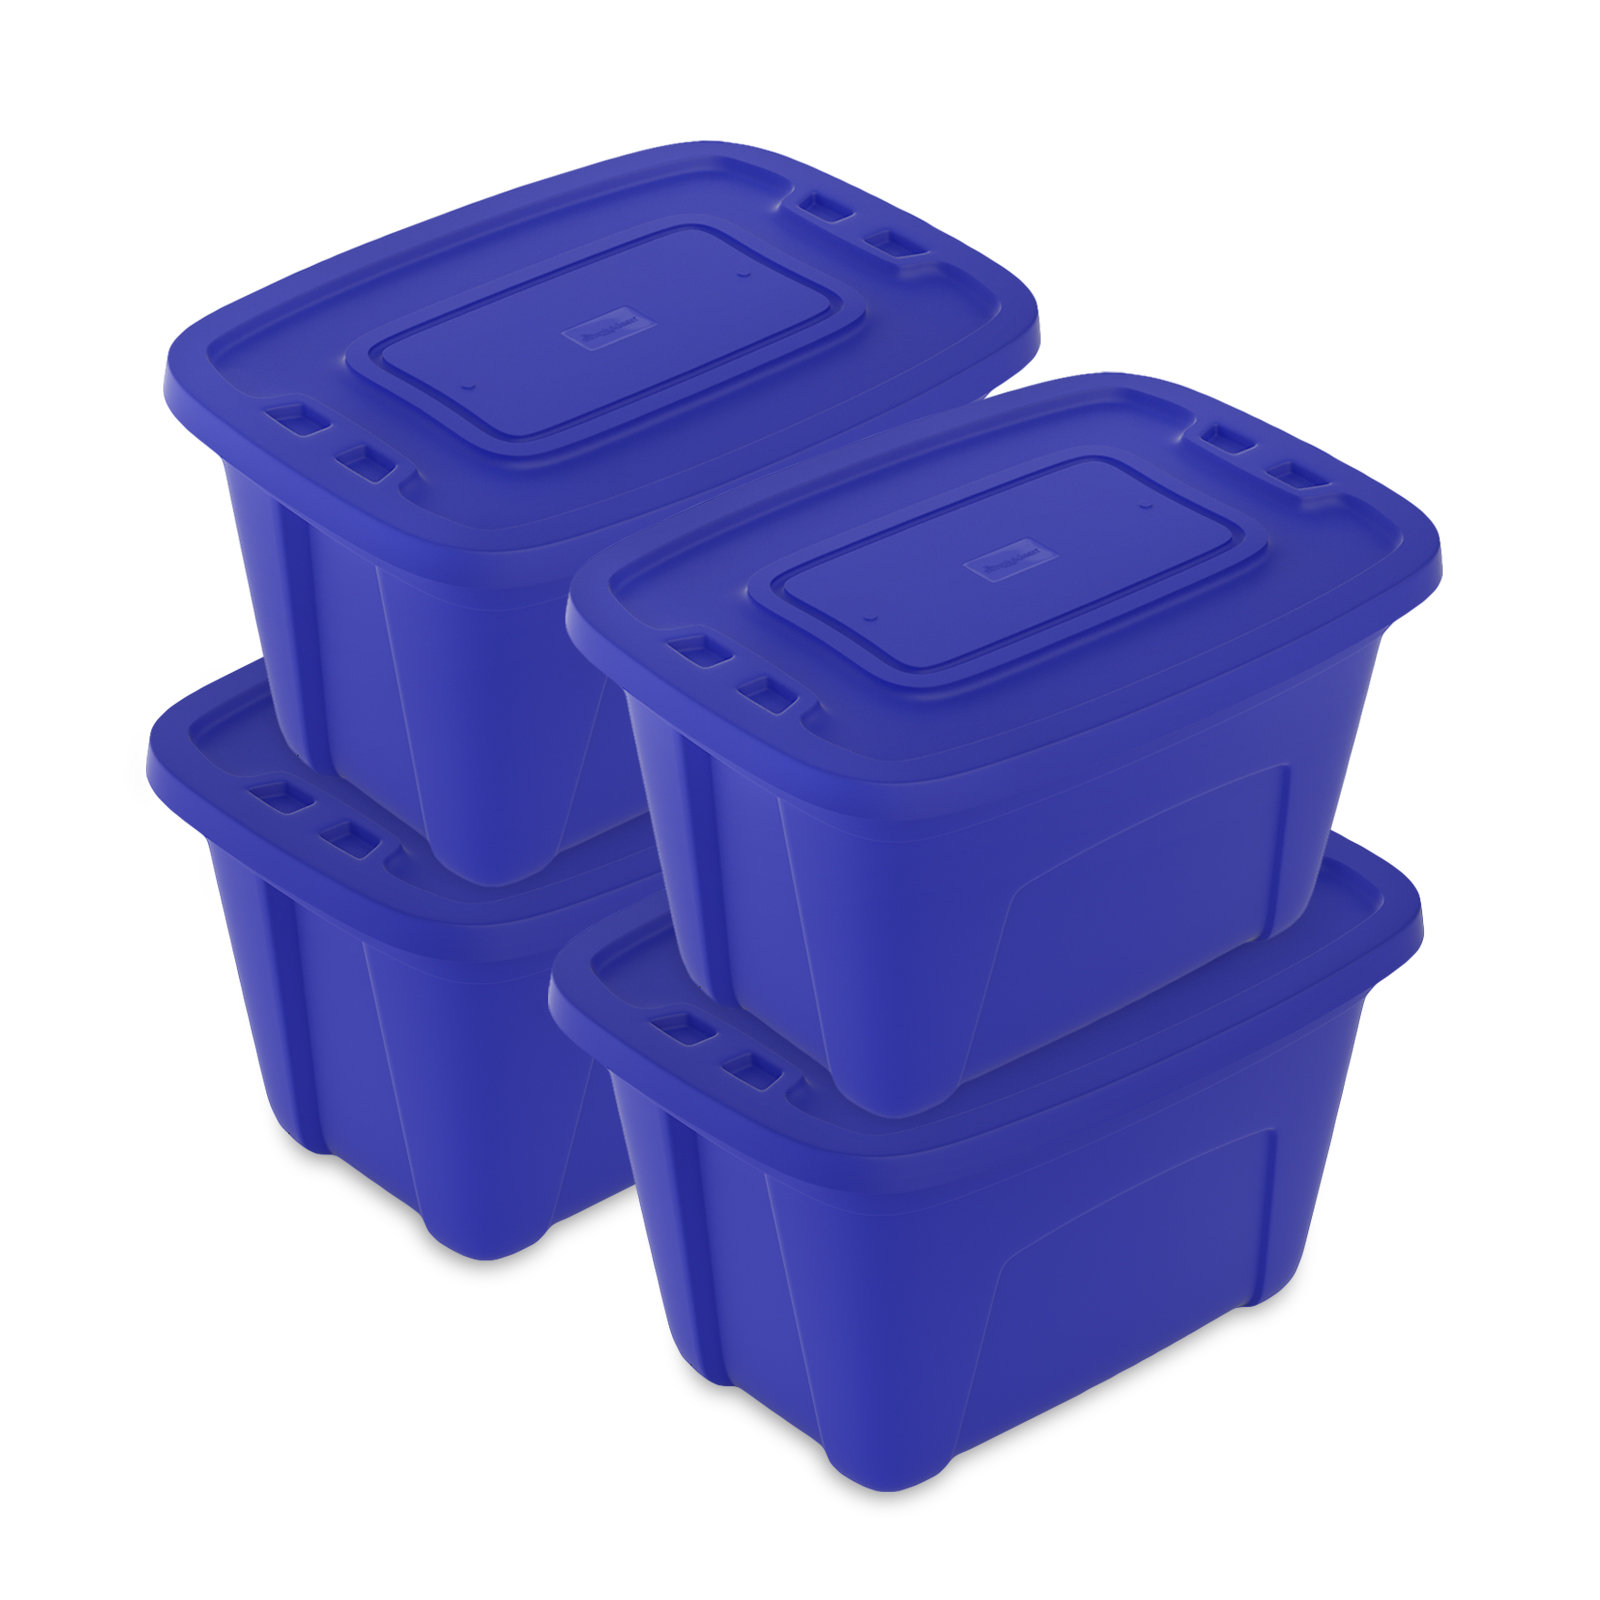 HOMZ 32 Gallon Large Standard Stackable Plastic Storage Container Bin with  Secure Snap Lid for Home Organization, Blue, (2 Pack)